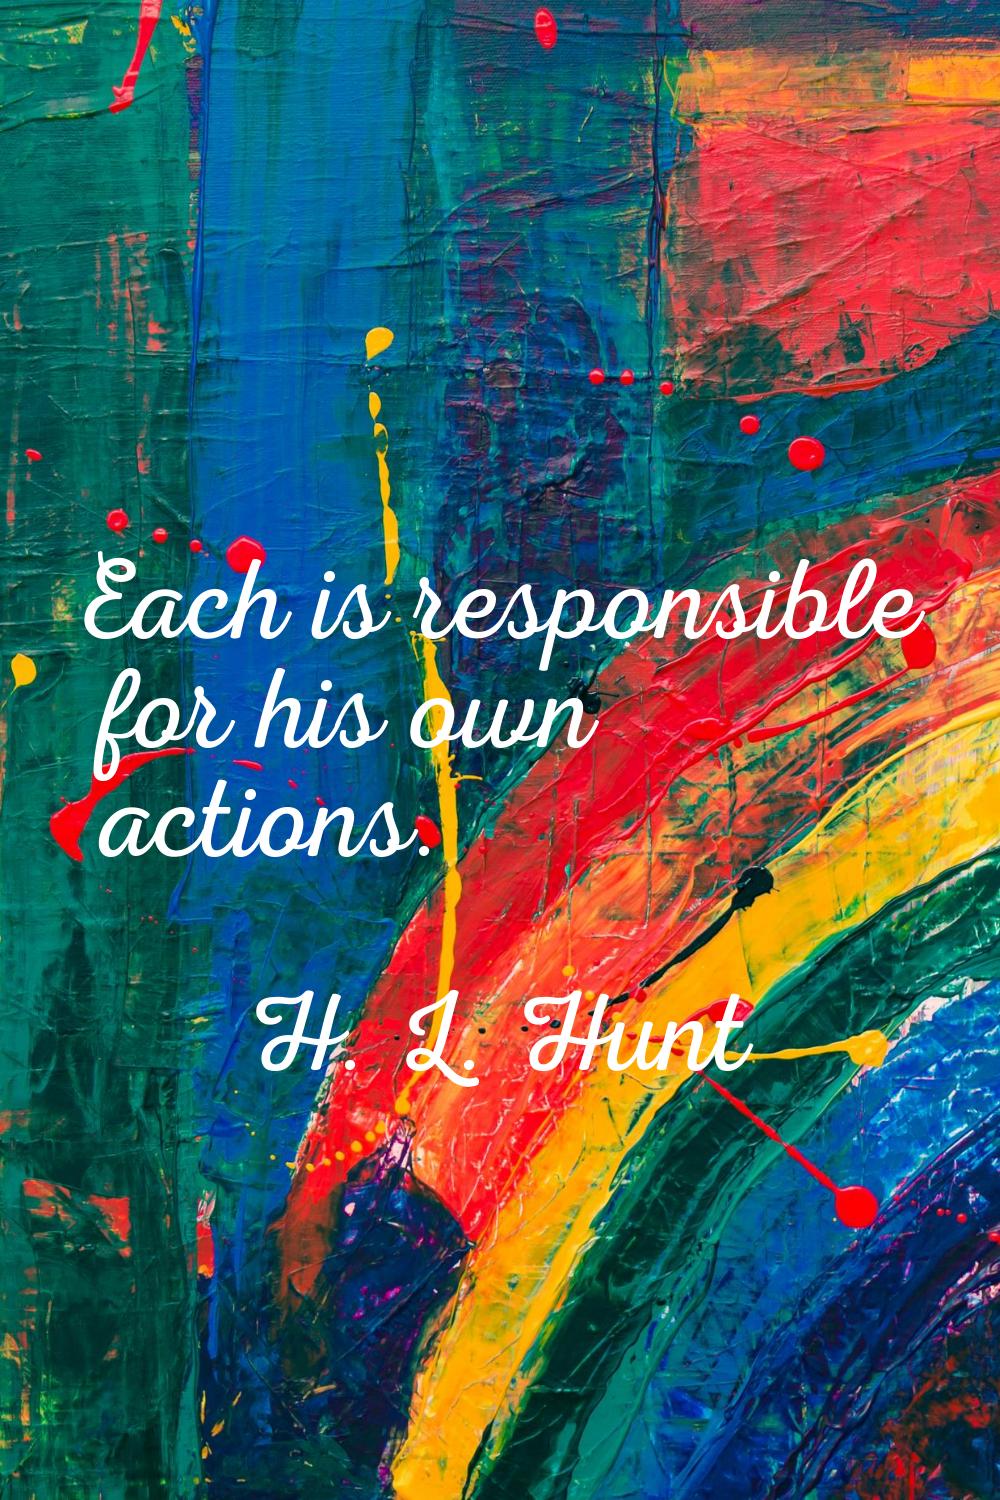 Each is responsible for his own actions.